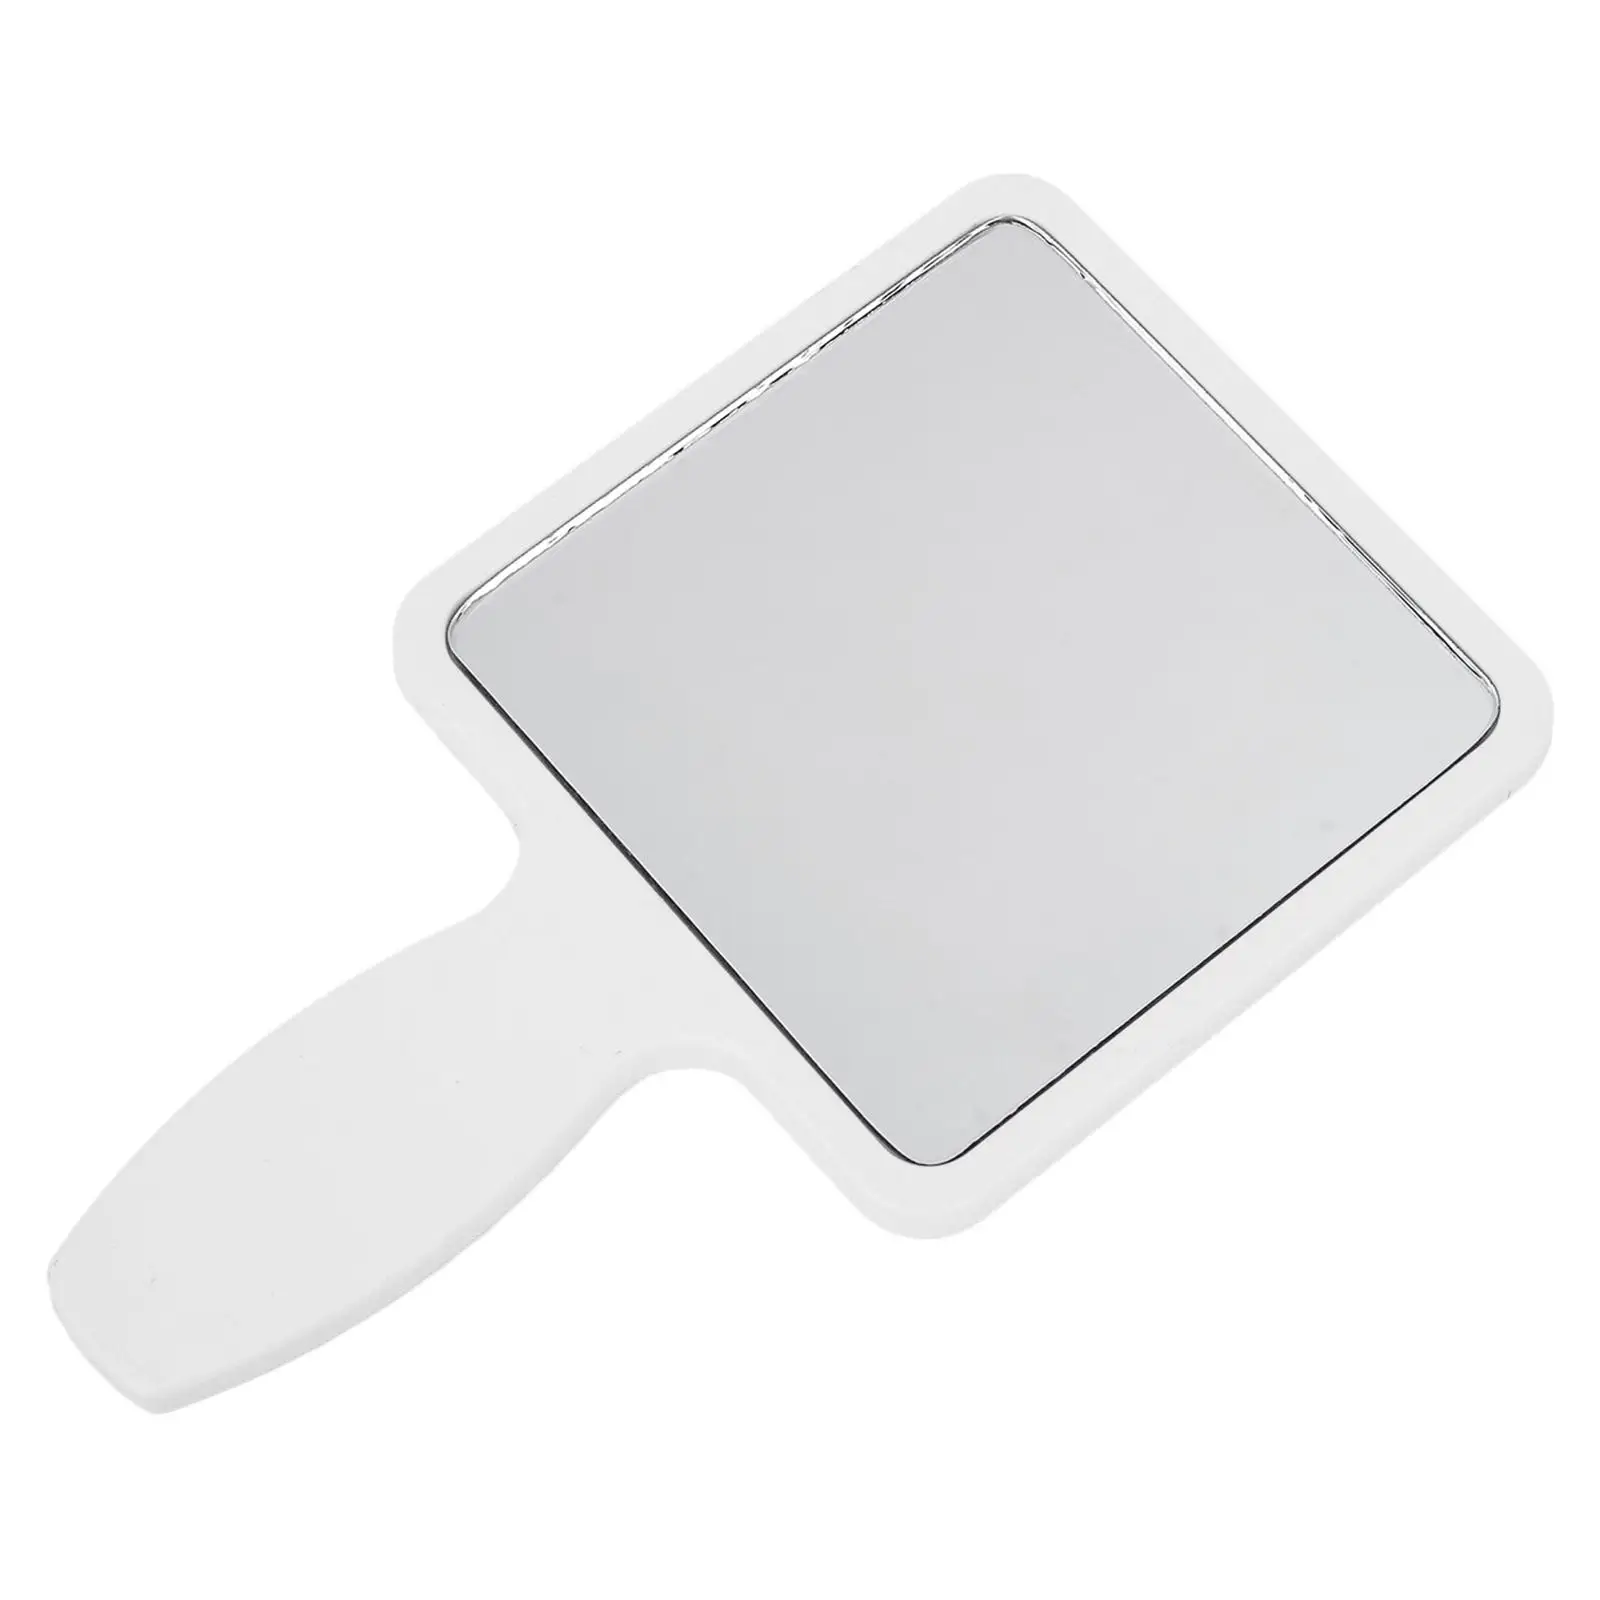 Portable Small Compact Cute Square Shaped Mirror with Handle Cosmetic   Look Adorable Design Easier to Hold